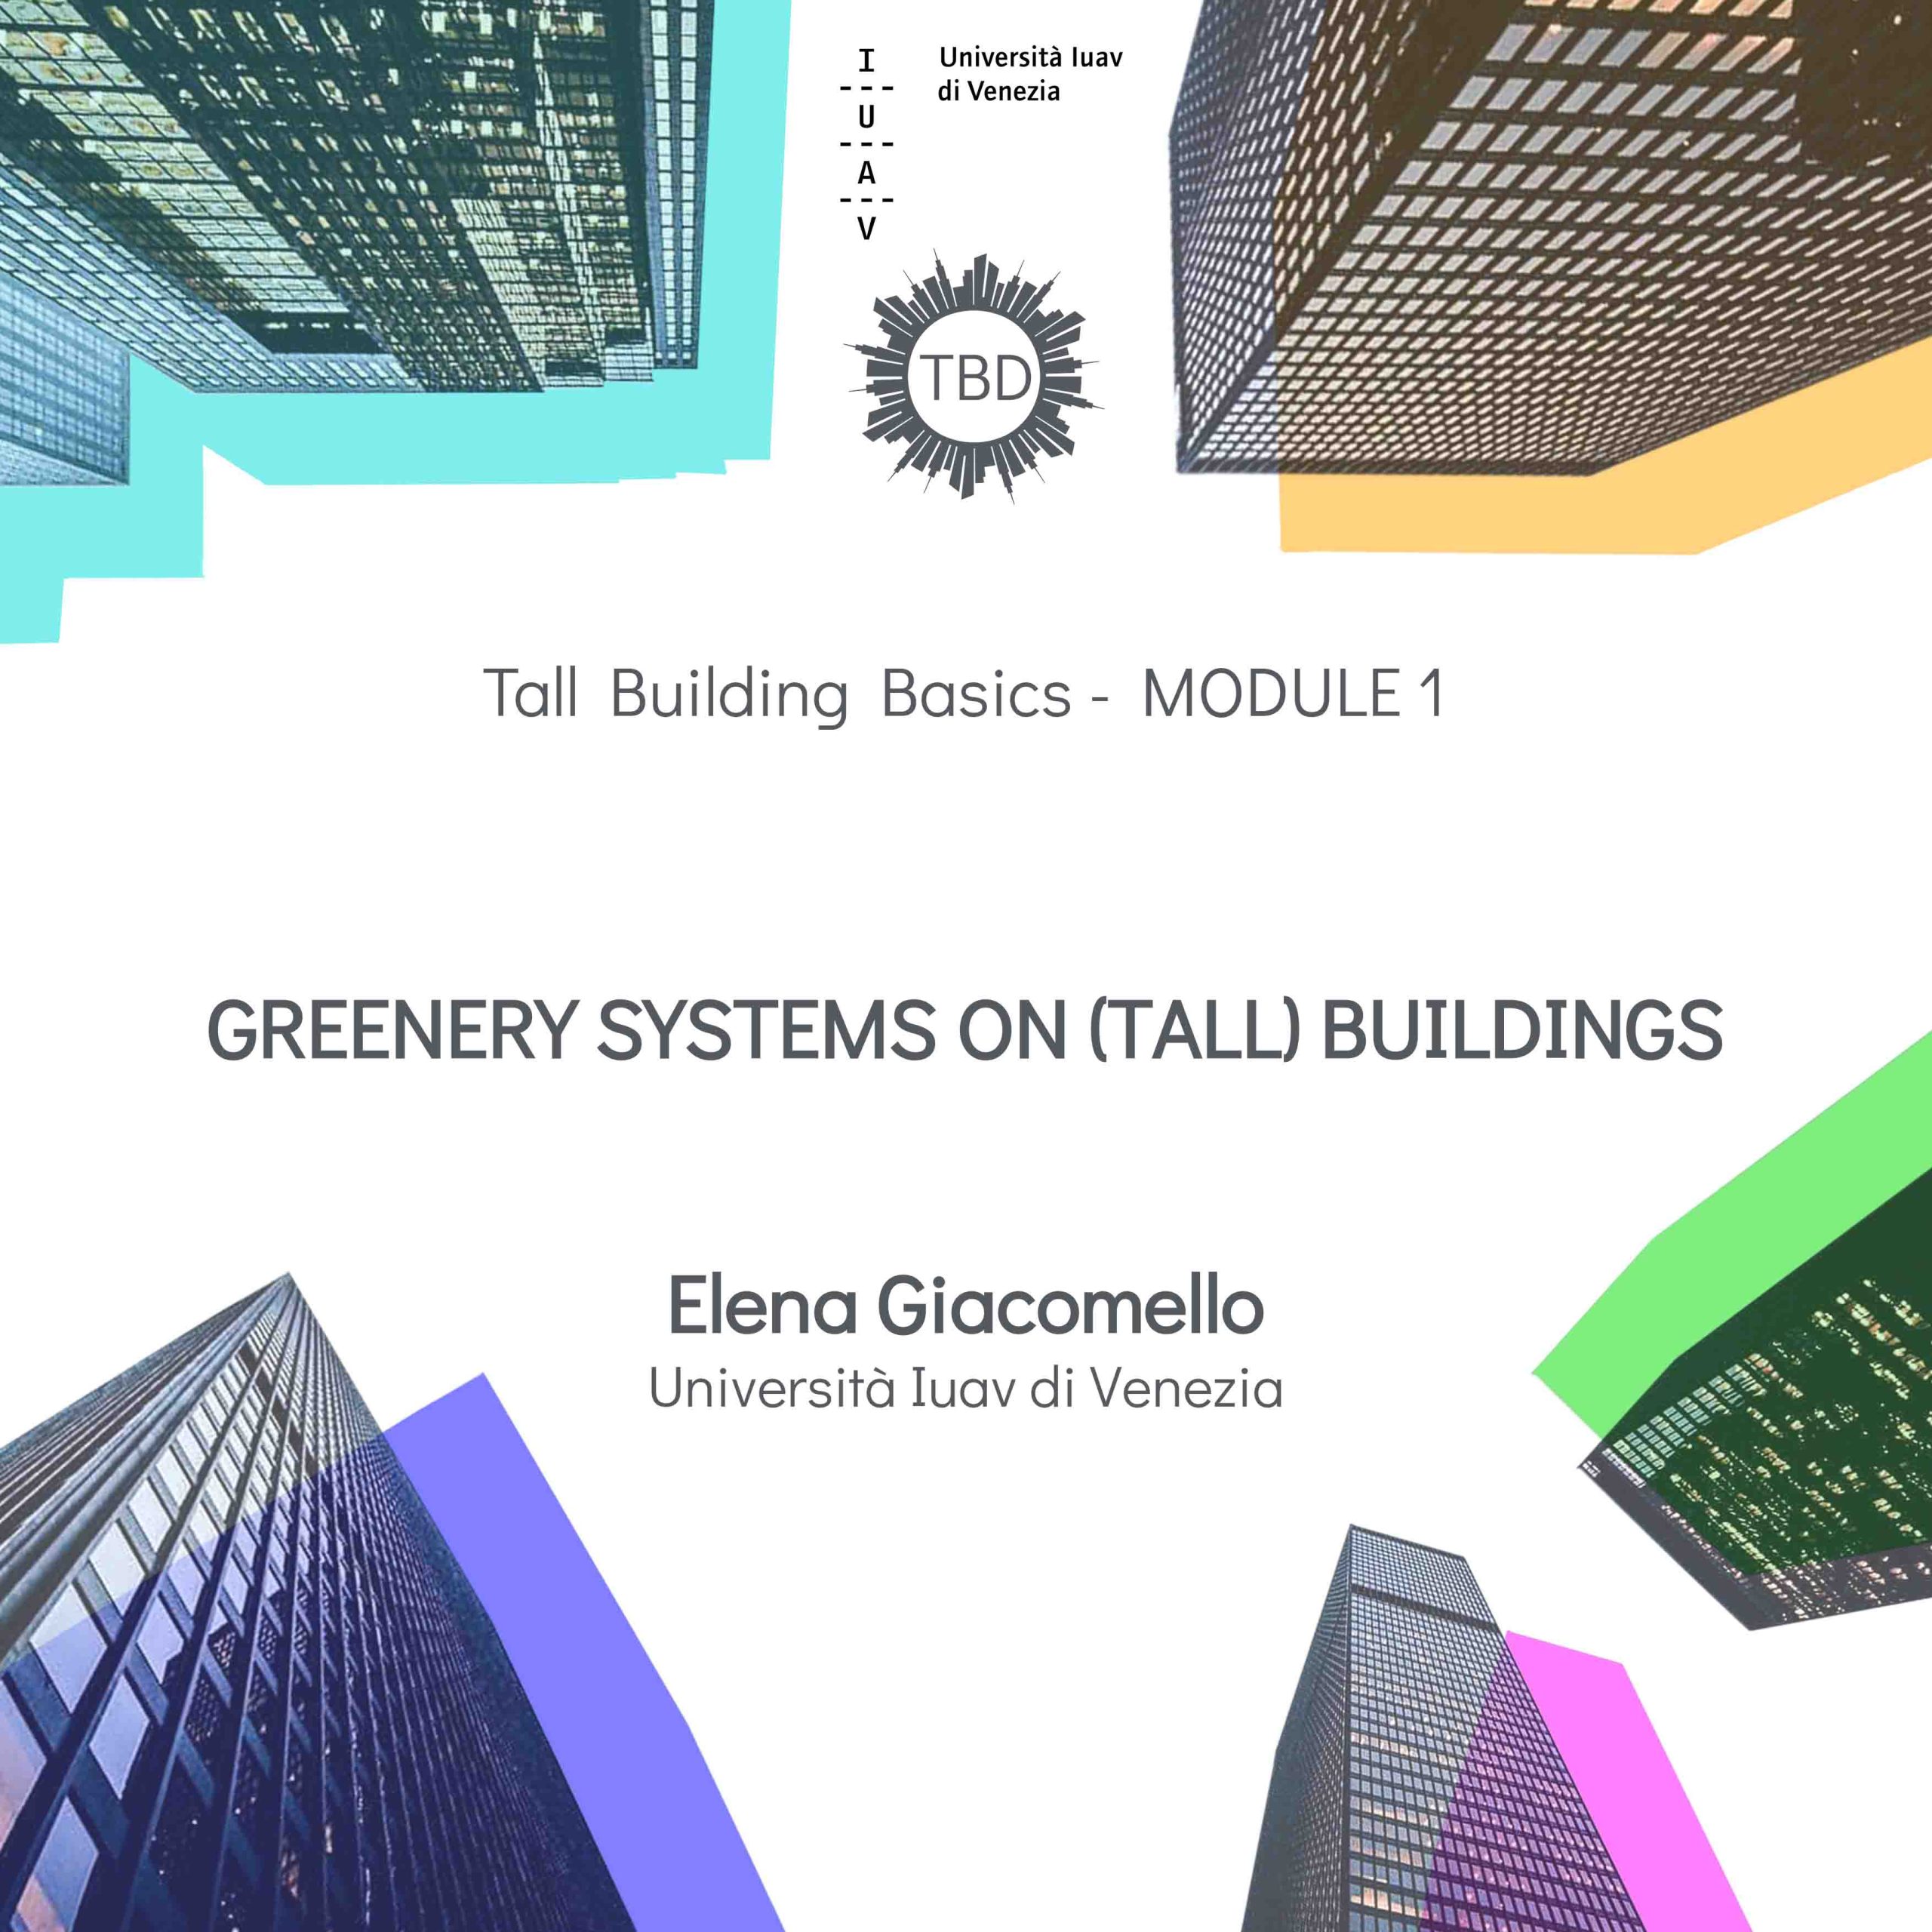 2021_12_10_Elena Giacomello - Greenery Systems on tall buildings